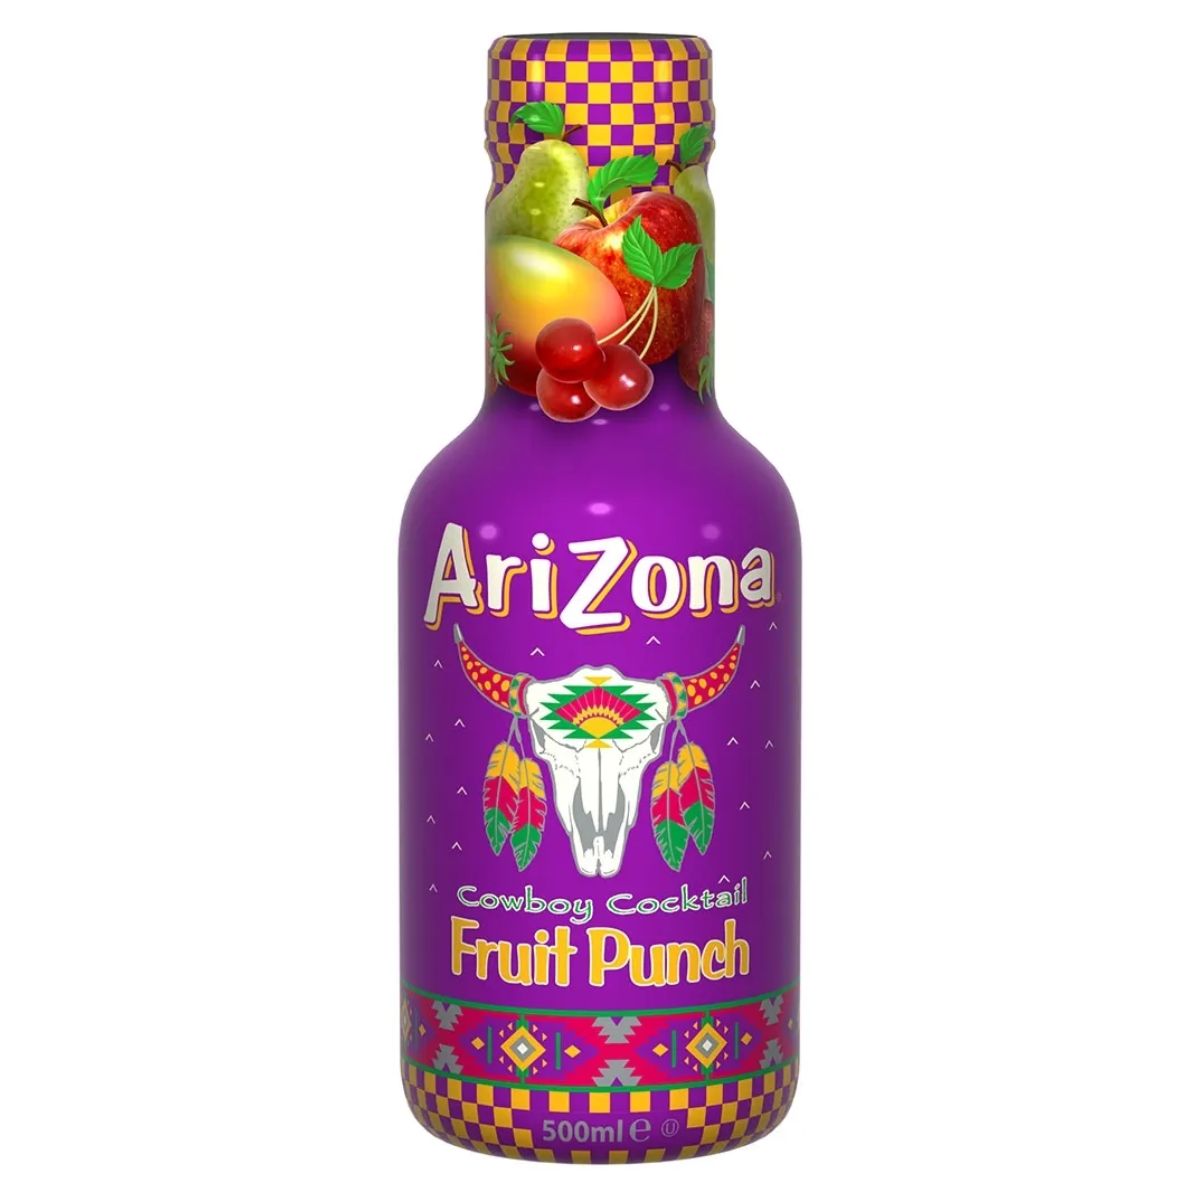 A bottle of Arizona - Fruit Punch Cocktail - 500ml.